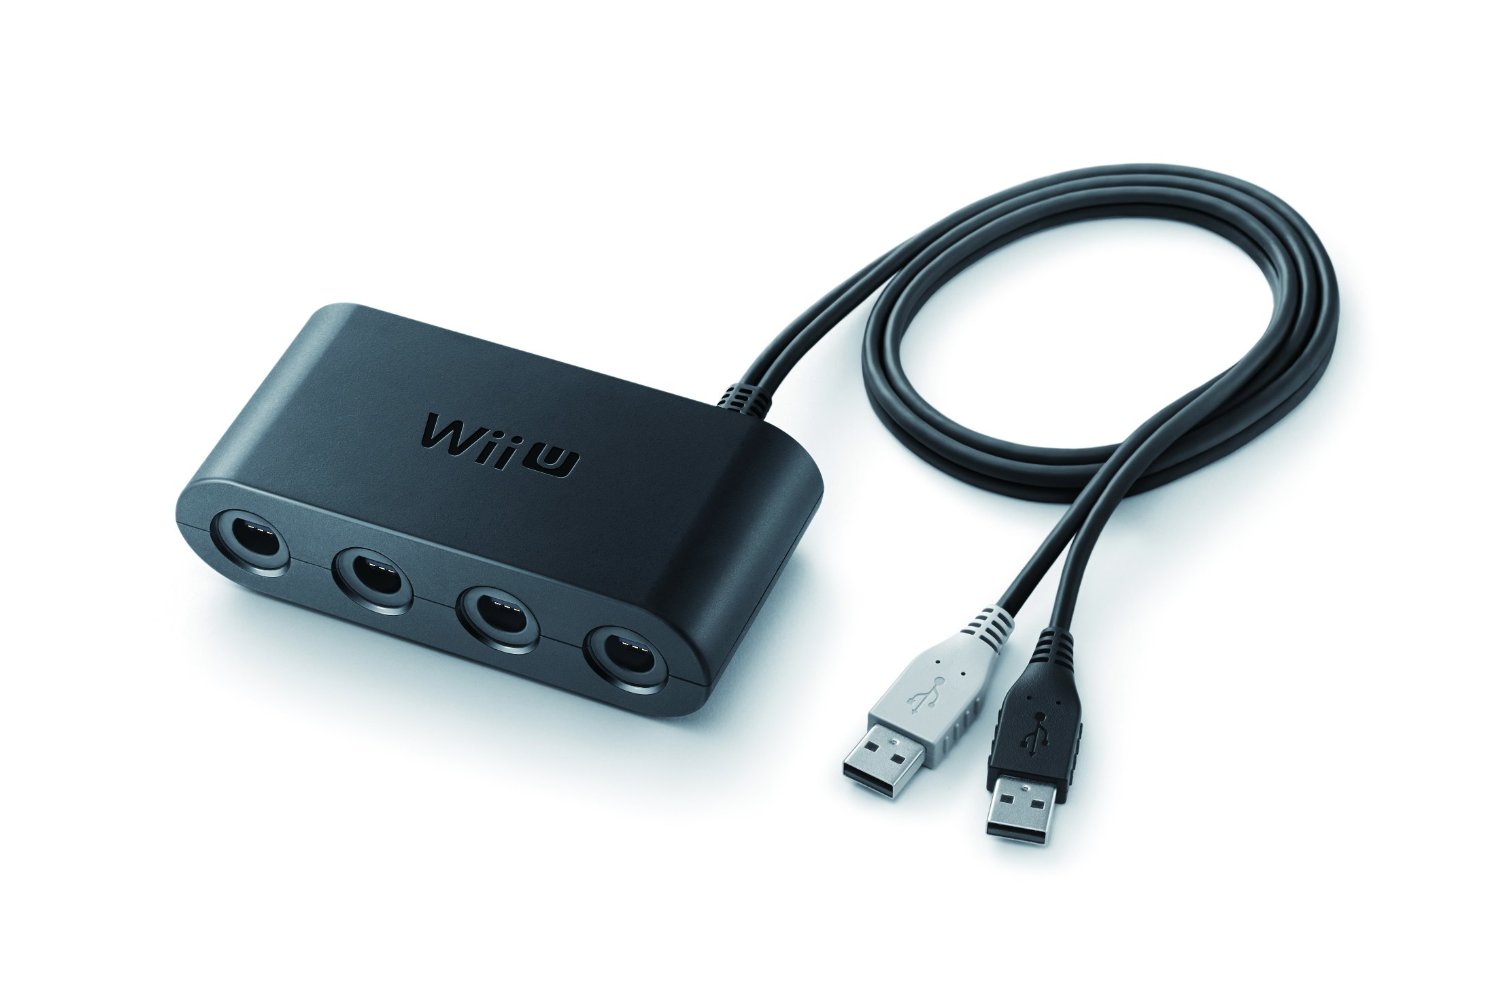 wii and gamecube emulator for pc